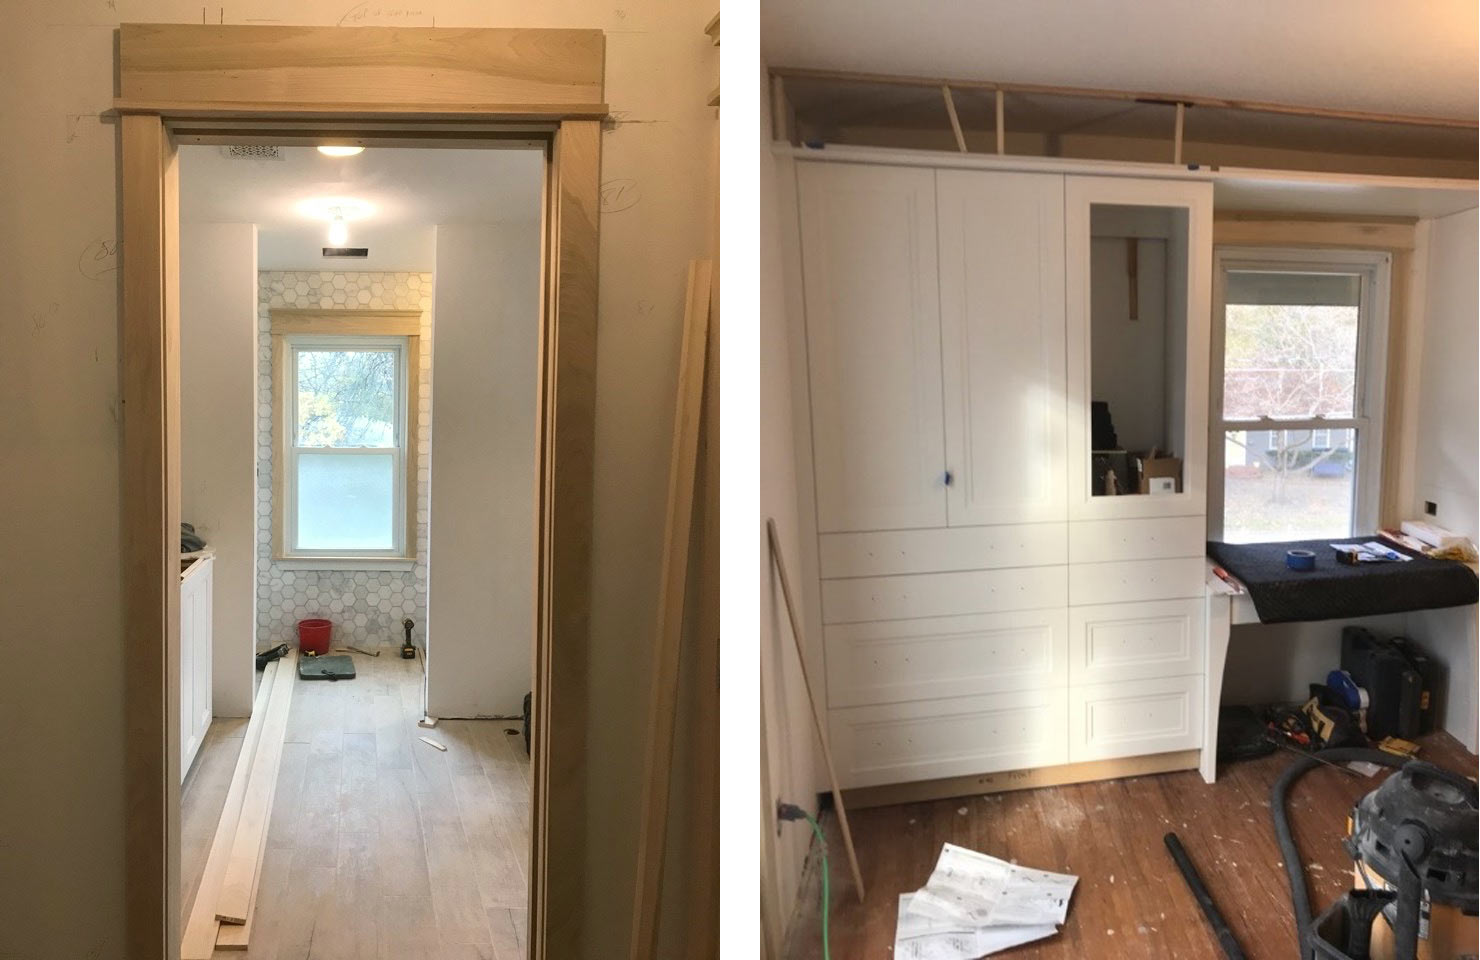 in progress photo of master suite remodel shows trim and custom cabinetry being installed by Silent Rivers